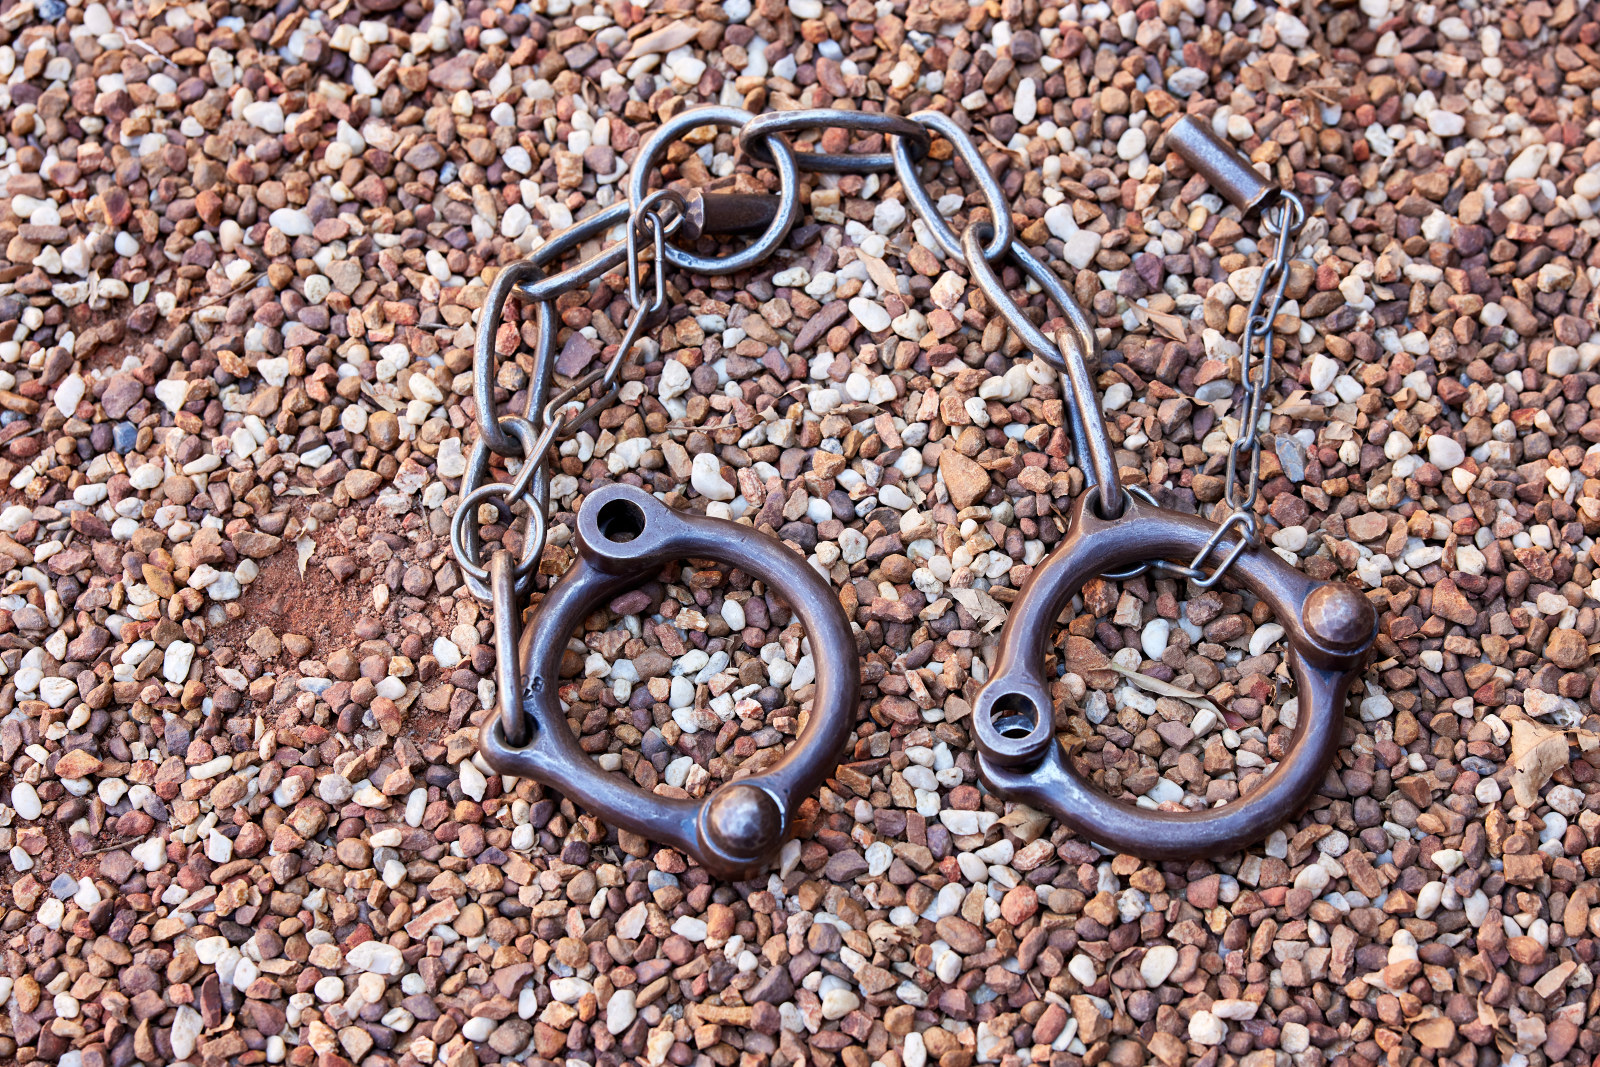 A close up of convict Leg irons